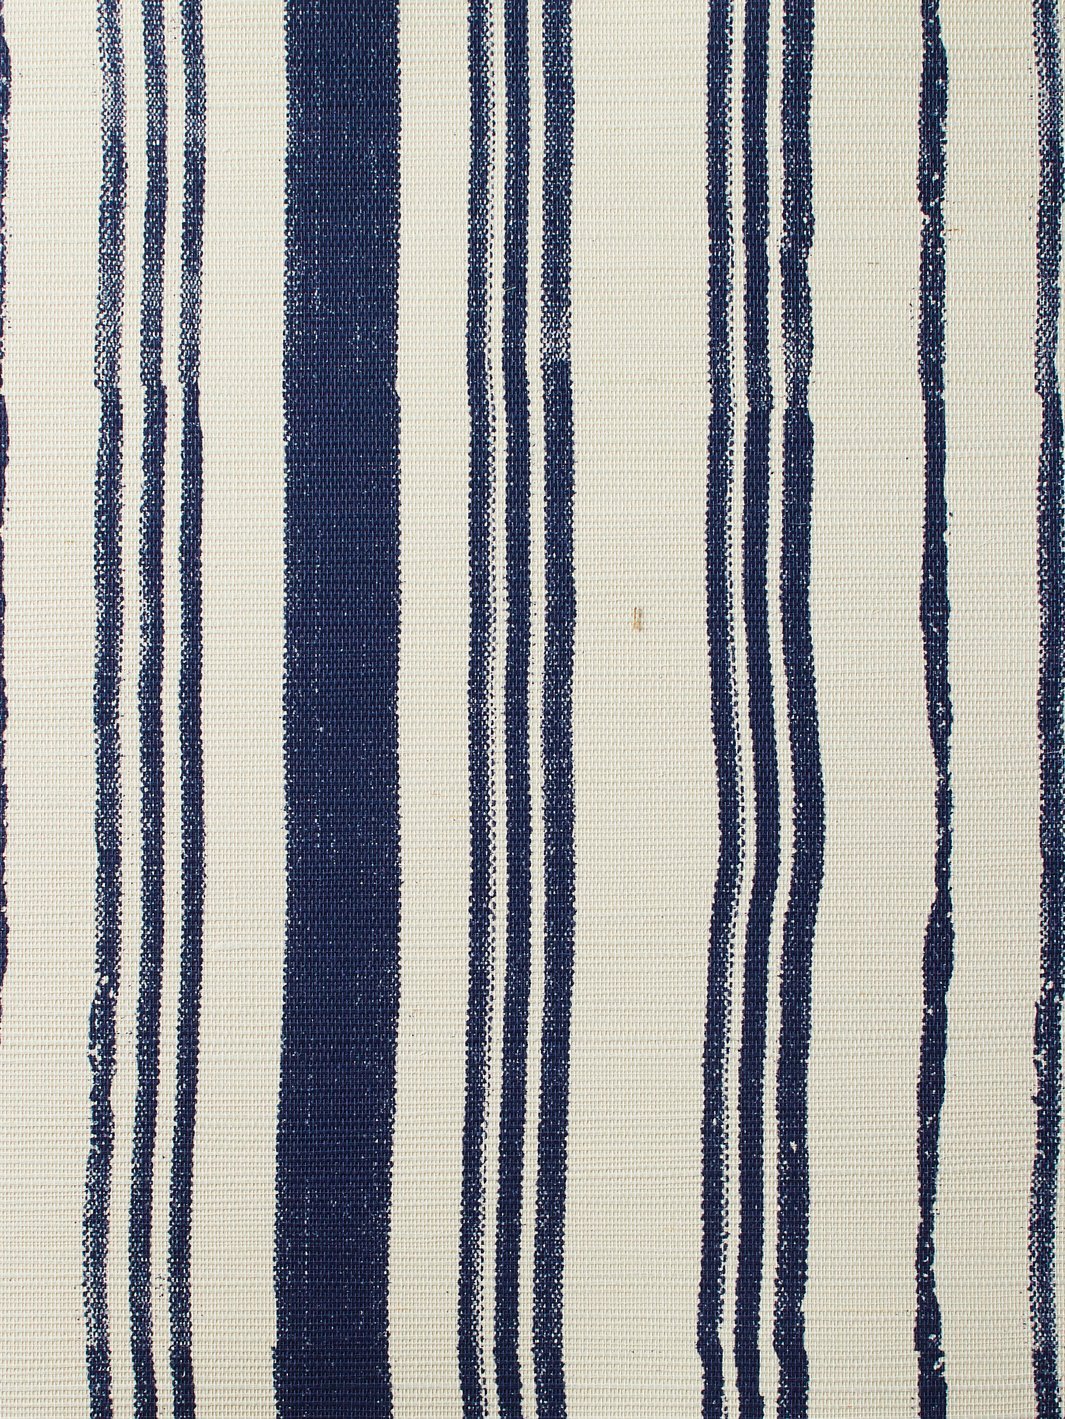 'Painted Stripes' Grasscloth' Wallpaper by Nathan Turner - Navy